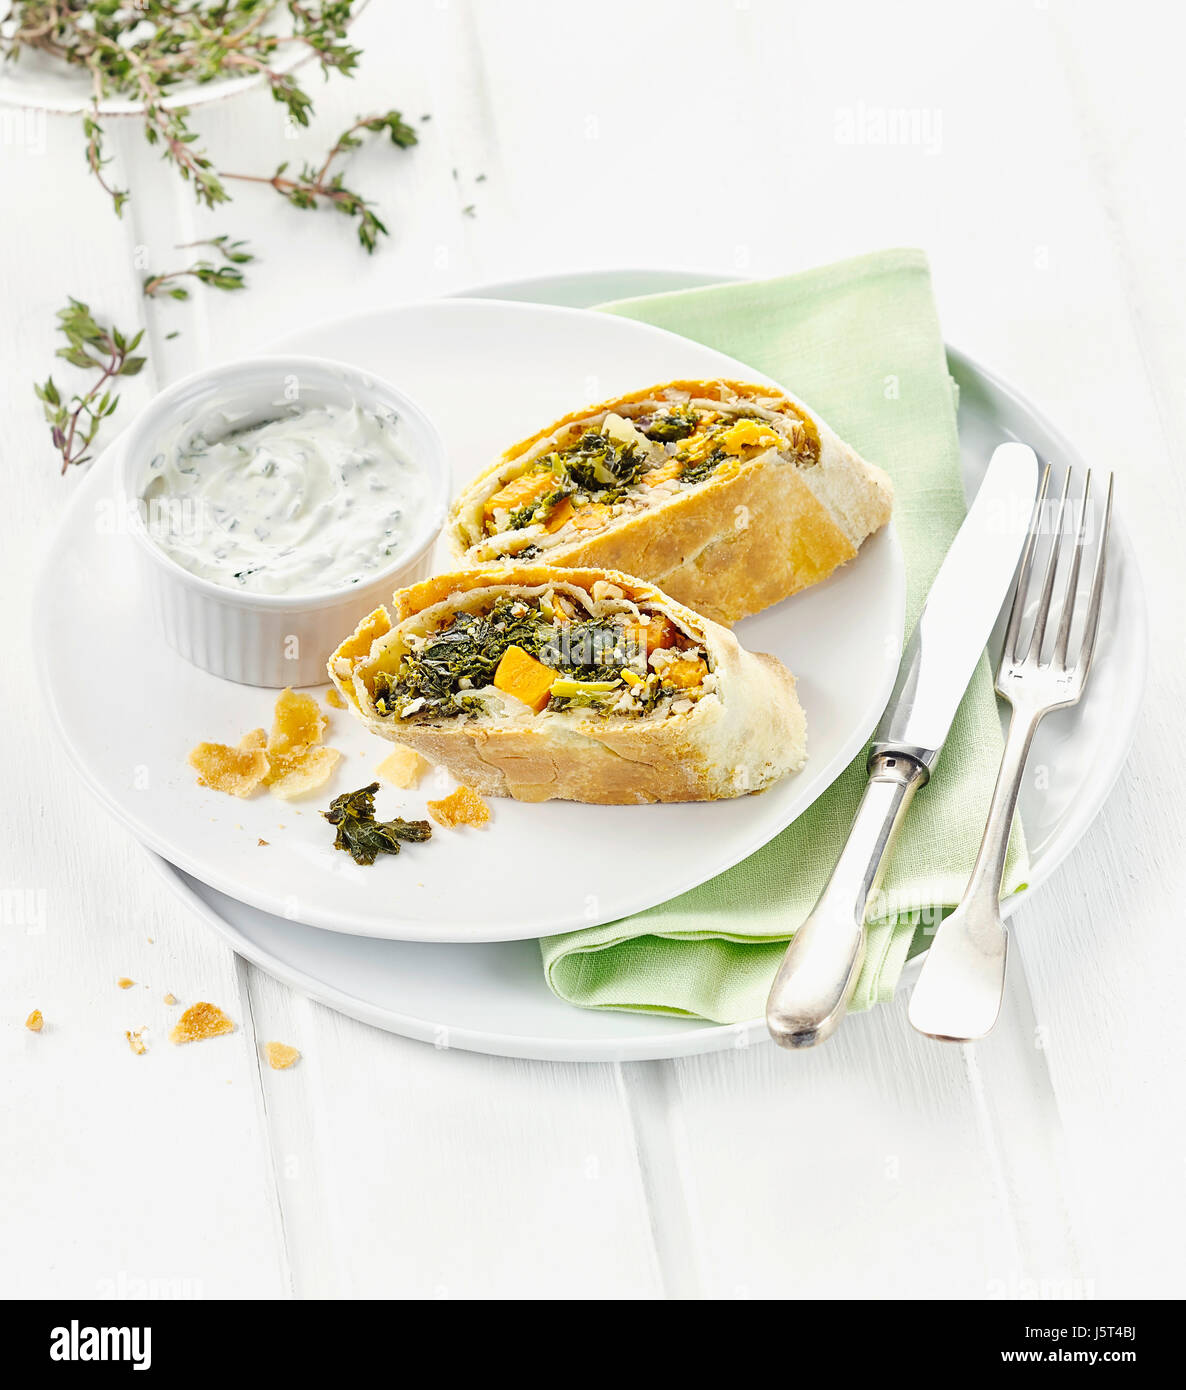 Strudel with kale and sweet potatoes Stock Photo